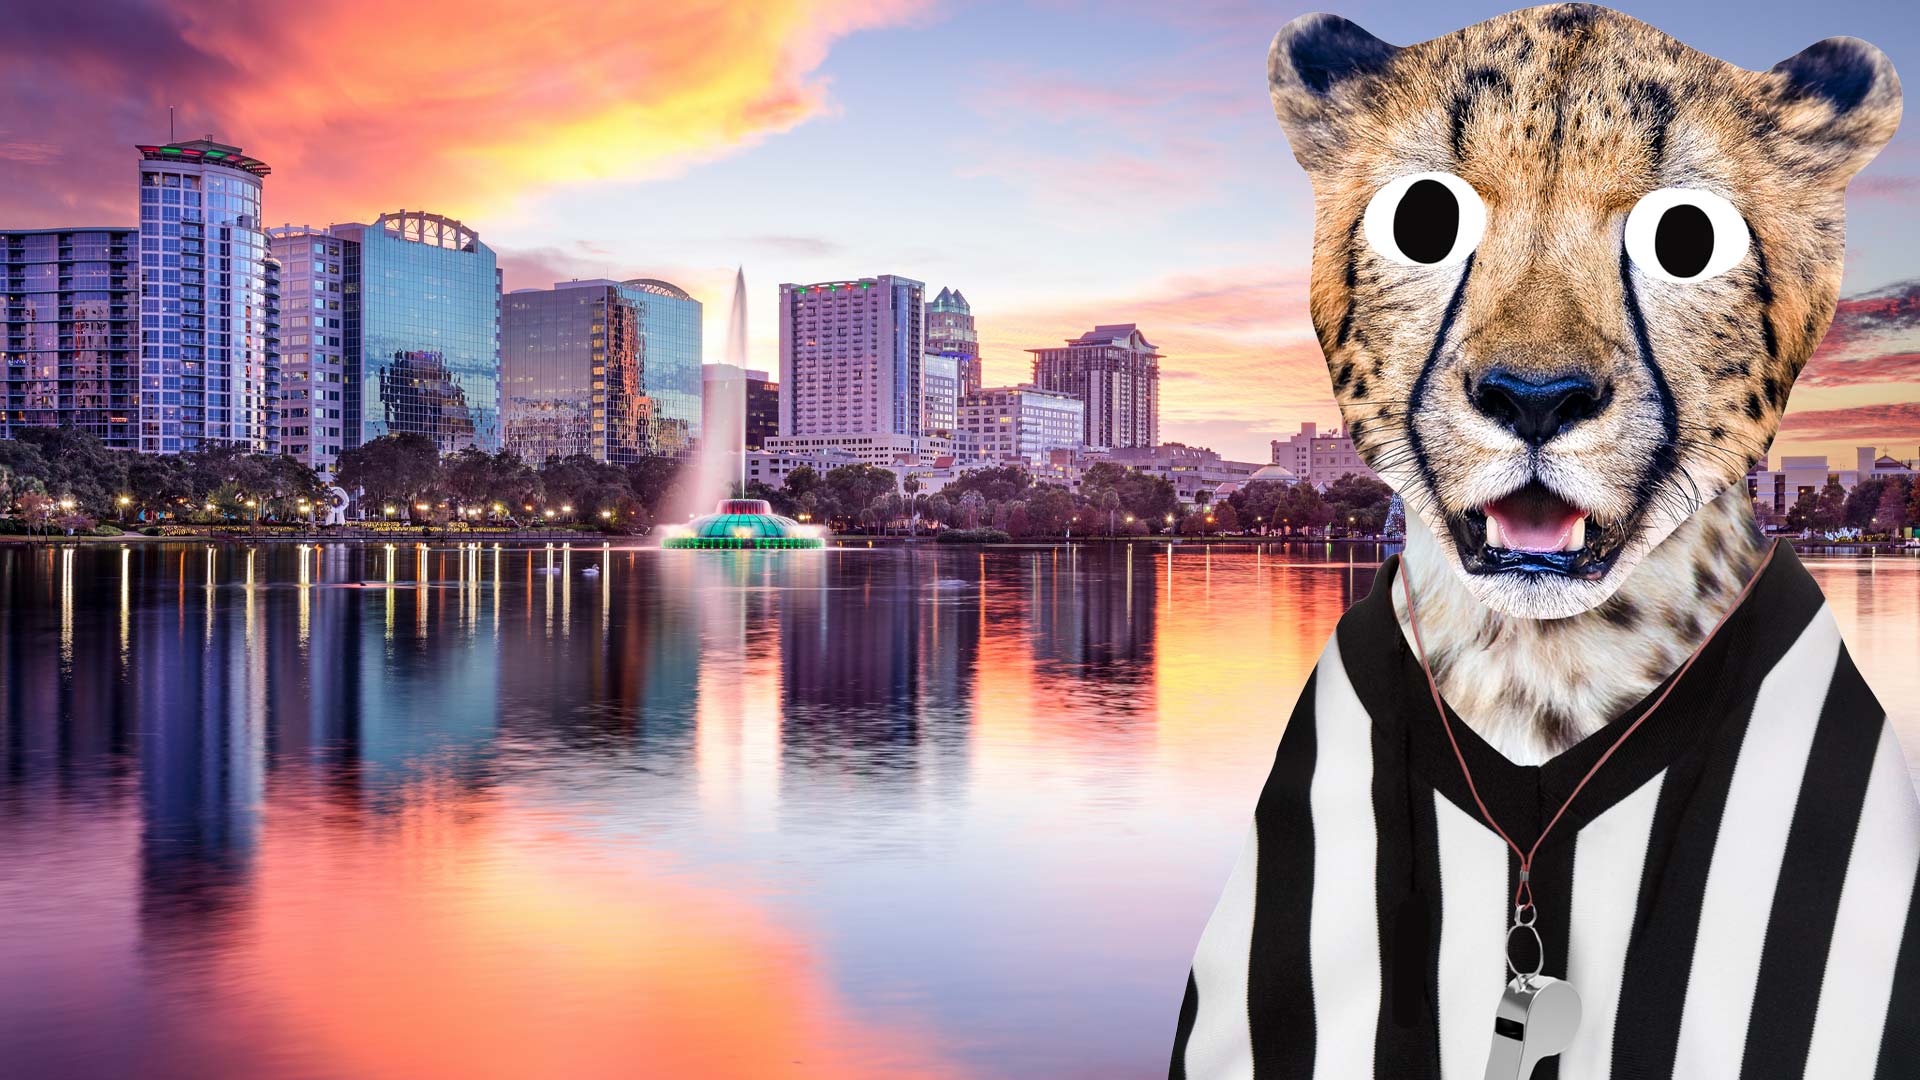 Orlando skyline with a cheetah dressed as a sports referee